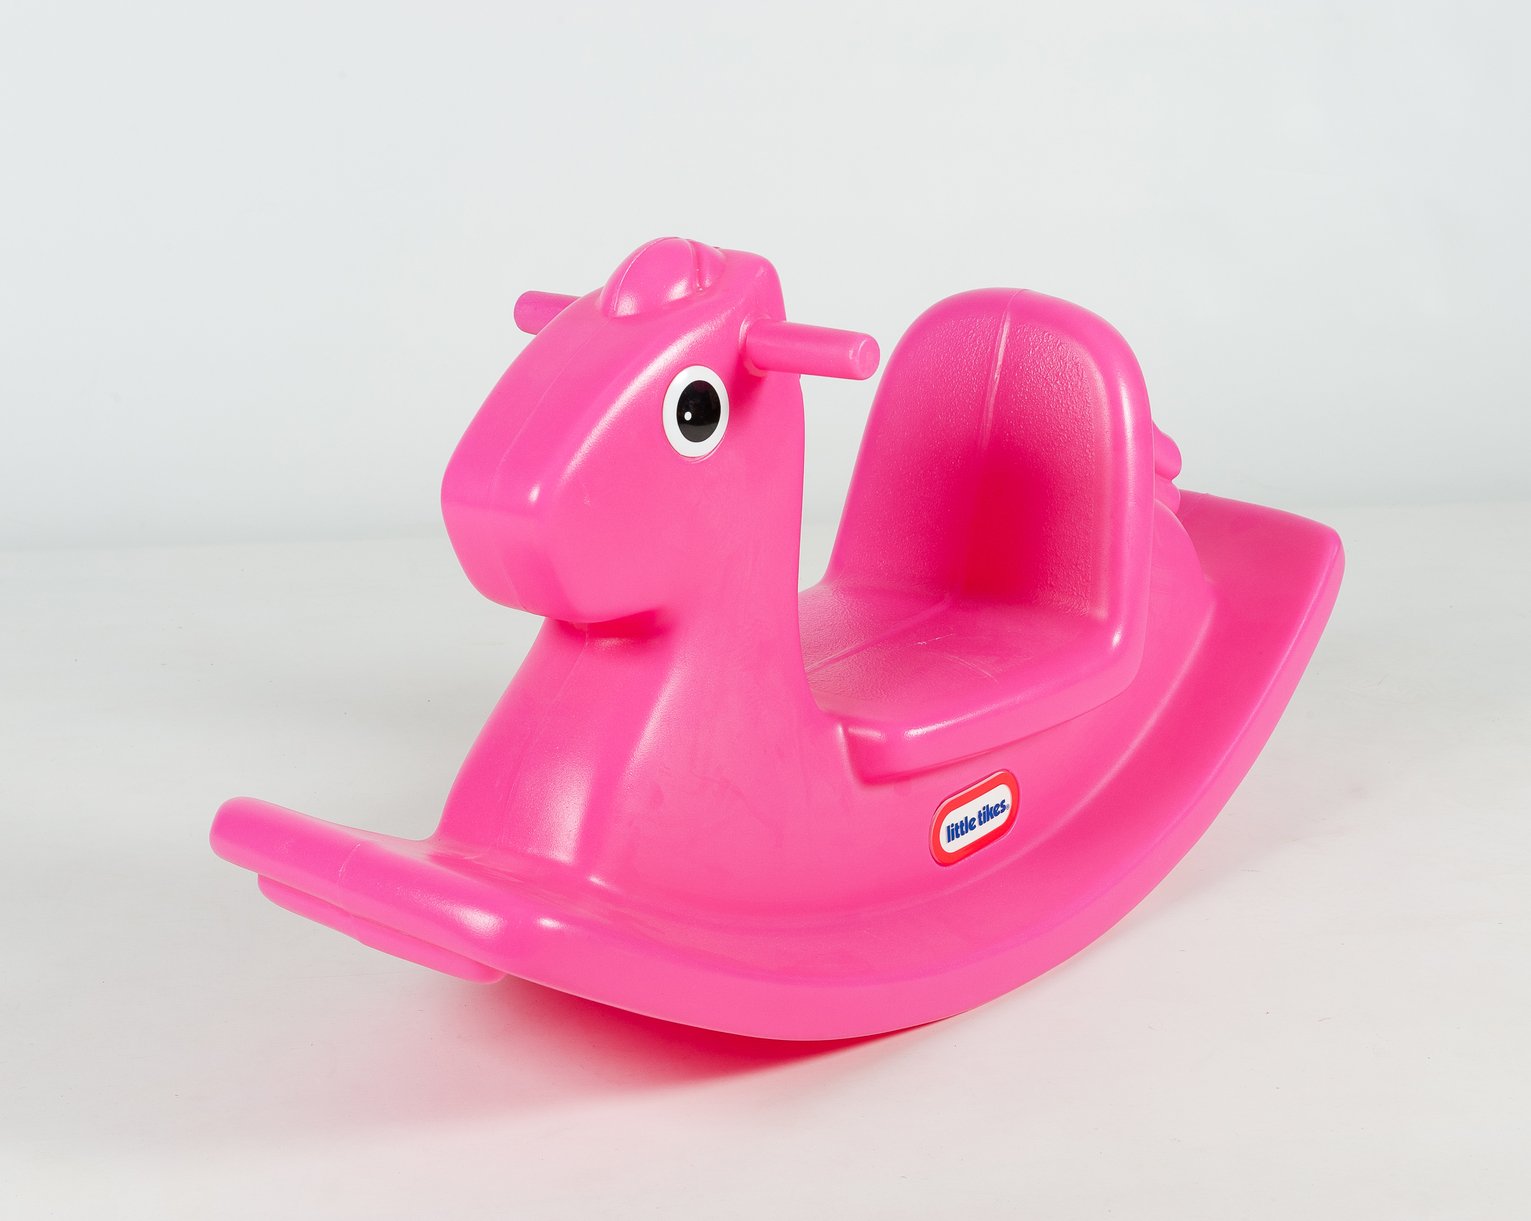 Little Tikes Rocking Horse review